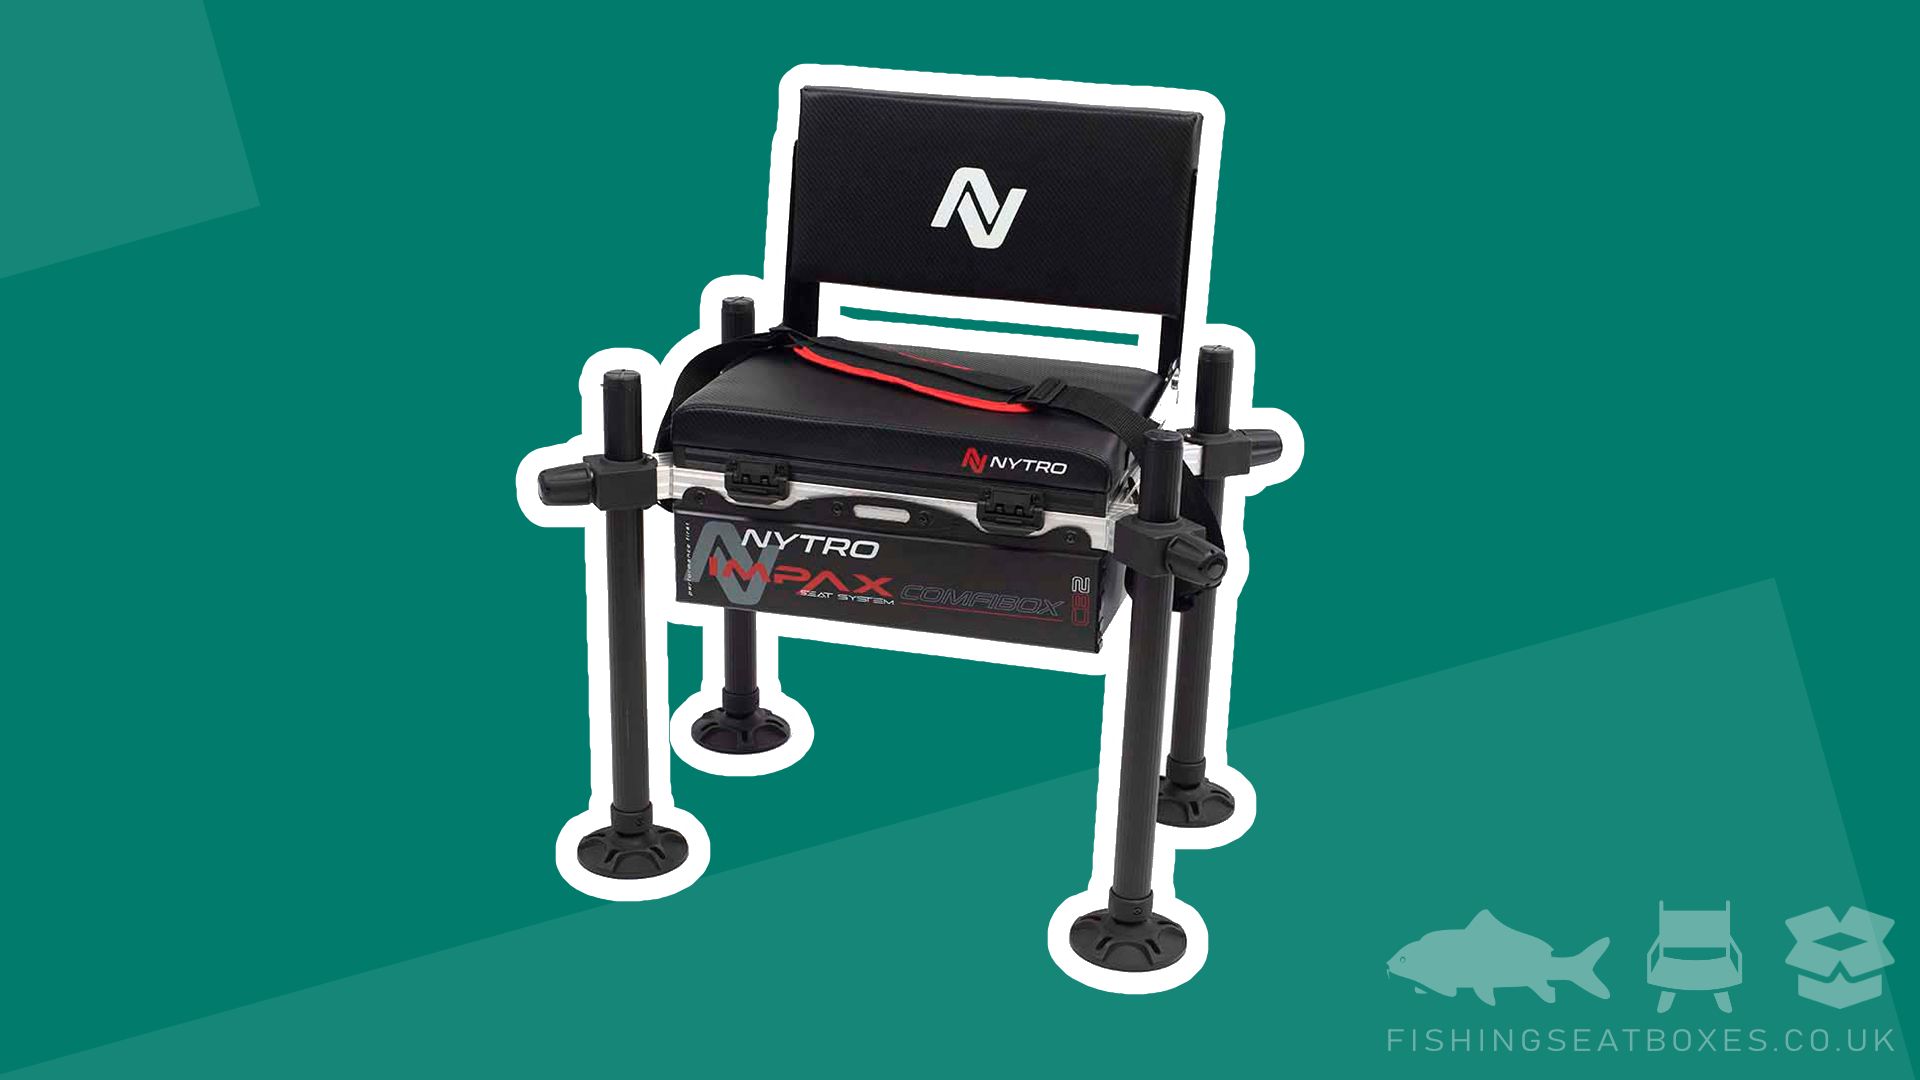 Article header for the Nytro Impax Comfibox CB2 Seatbox Review